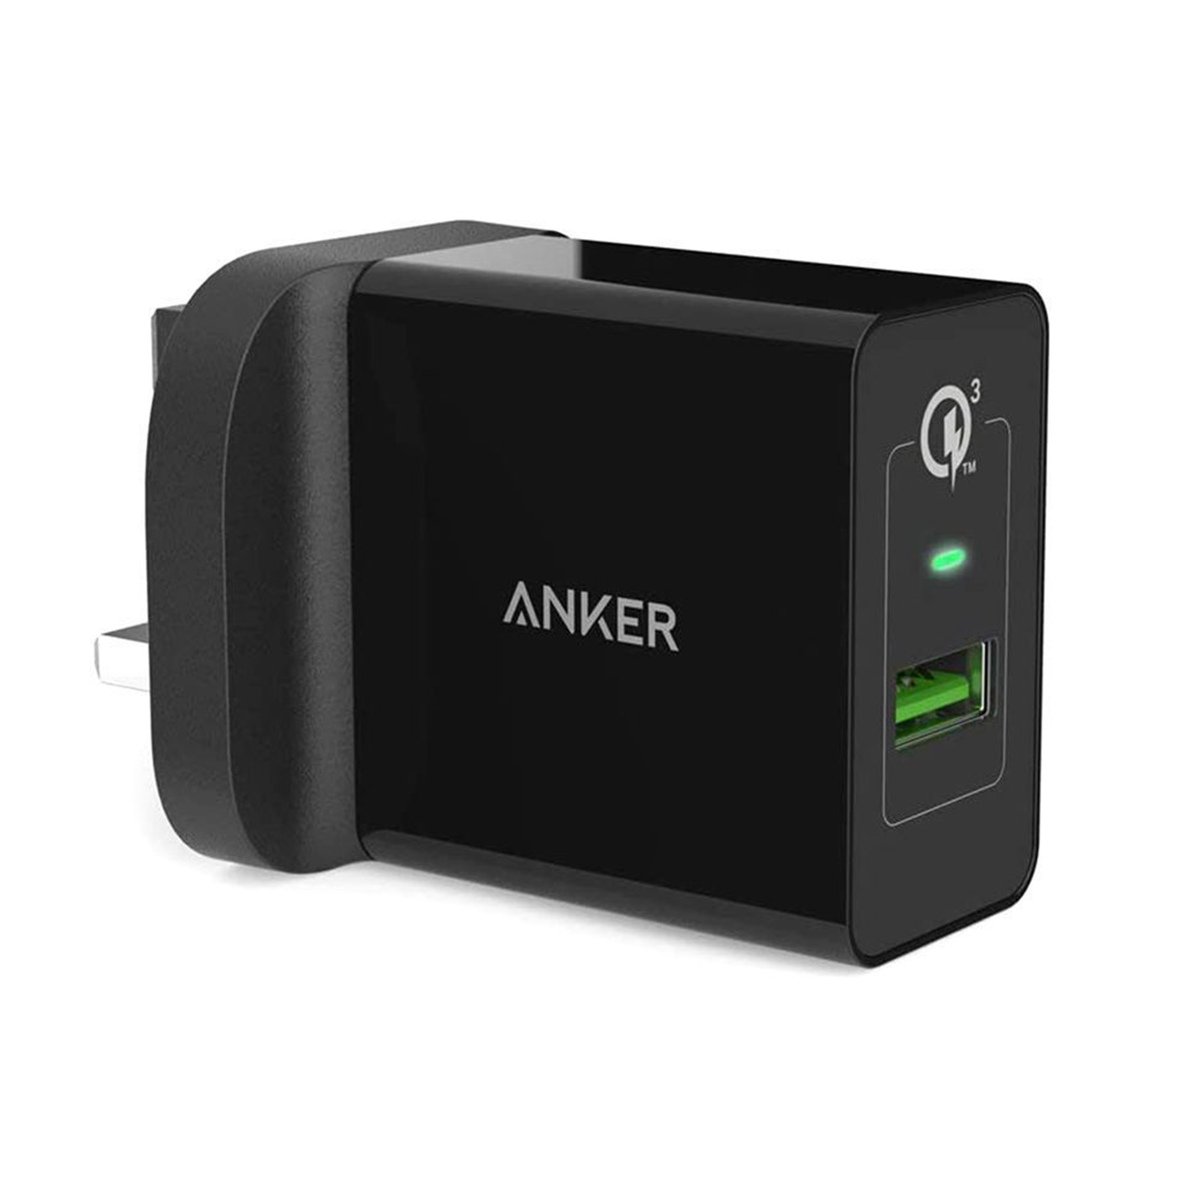 Anker Power Portable Charger A2013K11 Black